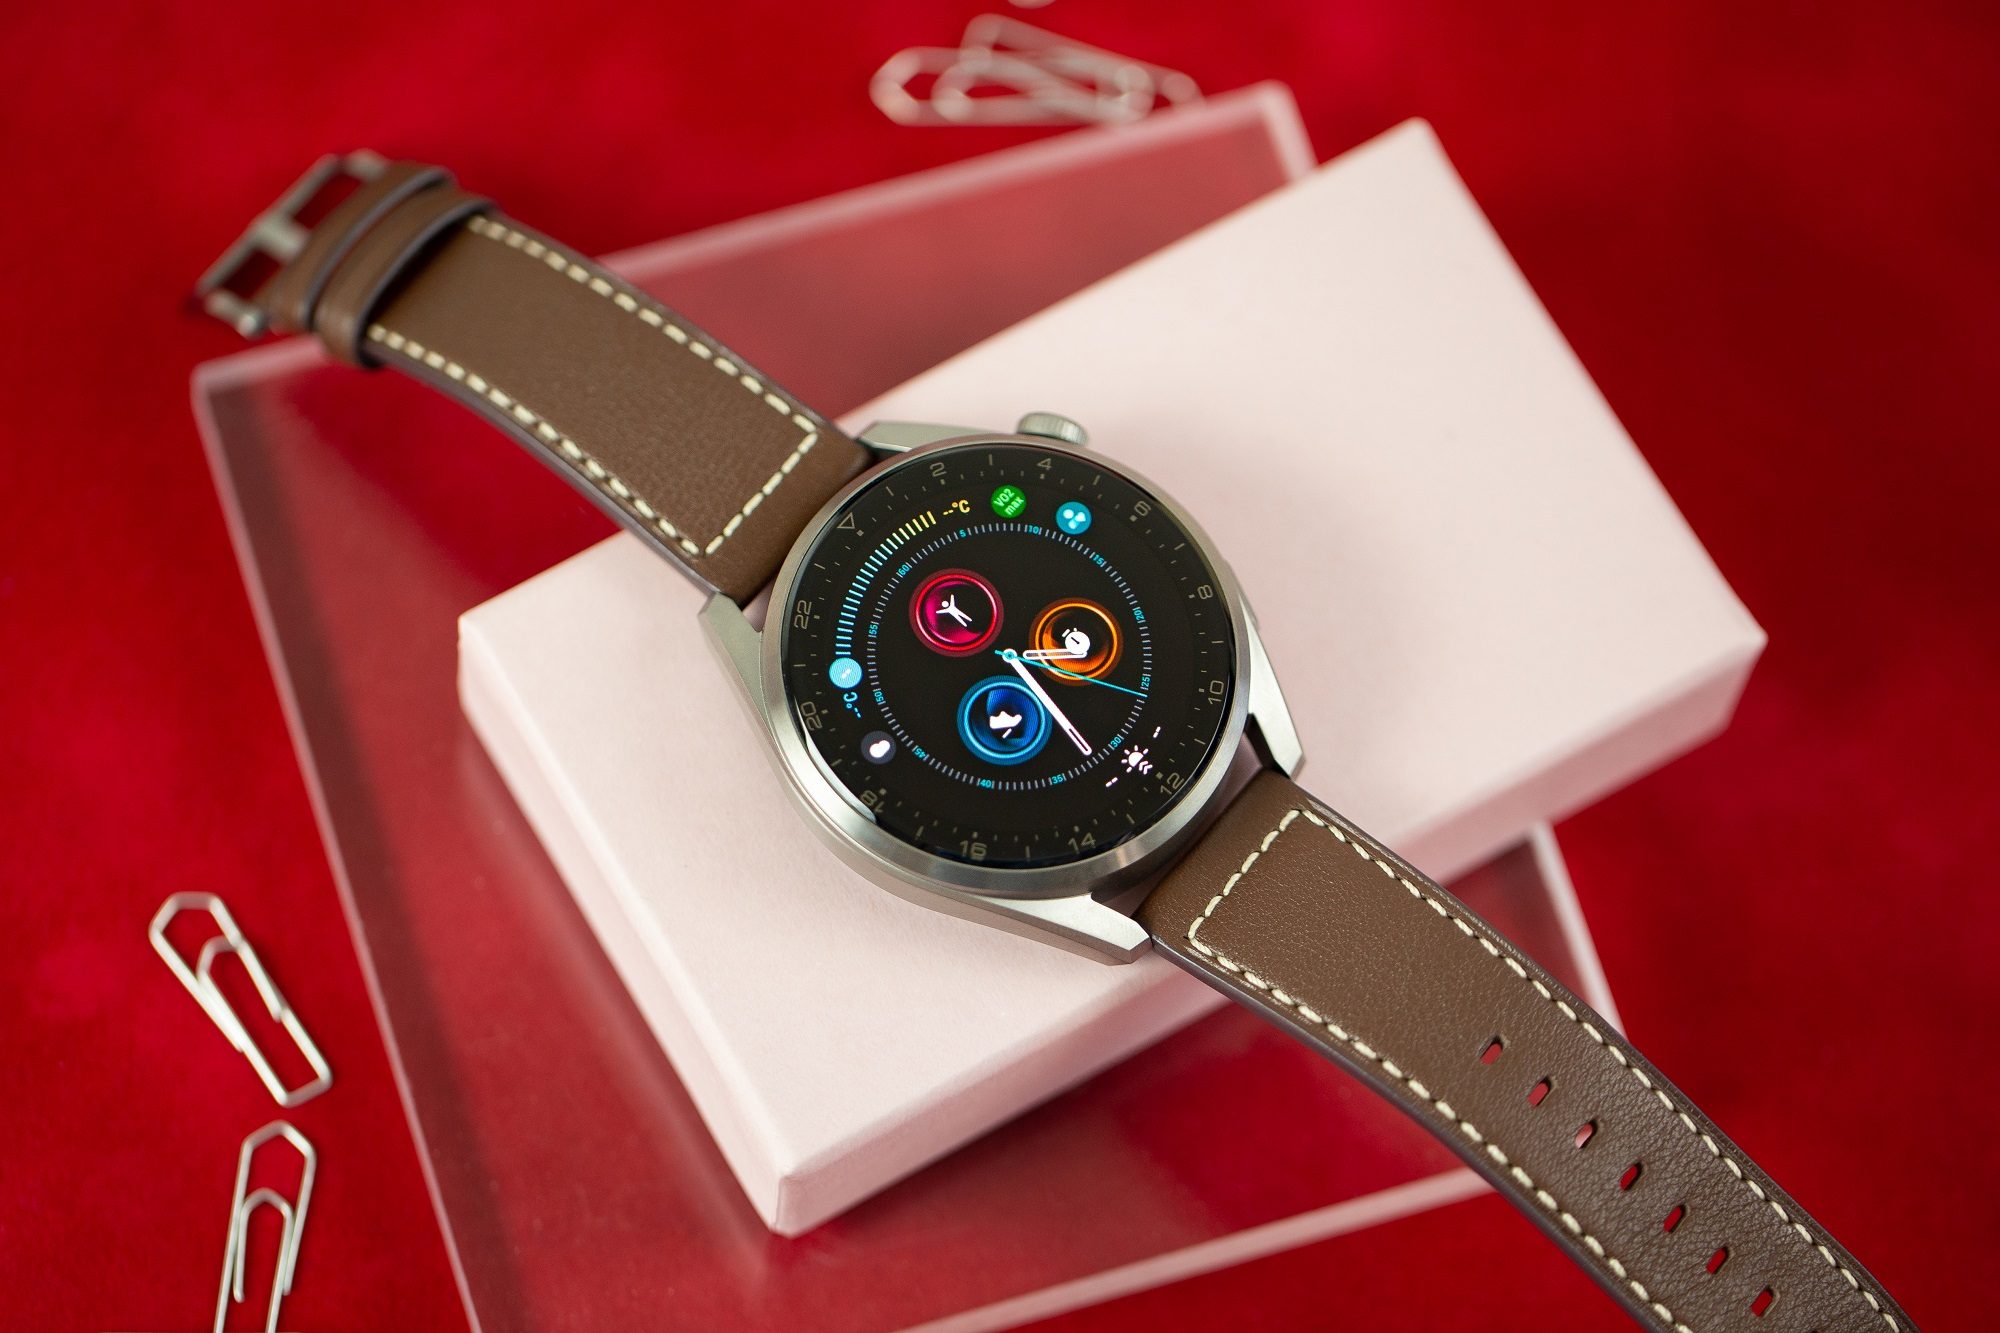 Huawei Watch 3 Pro VS GT 3 Pro. The Best Value for your Money is? 